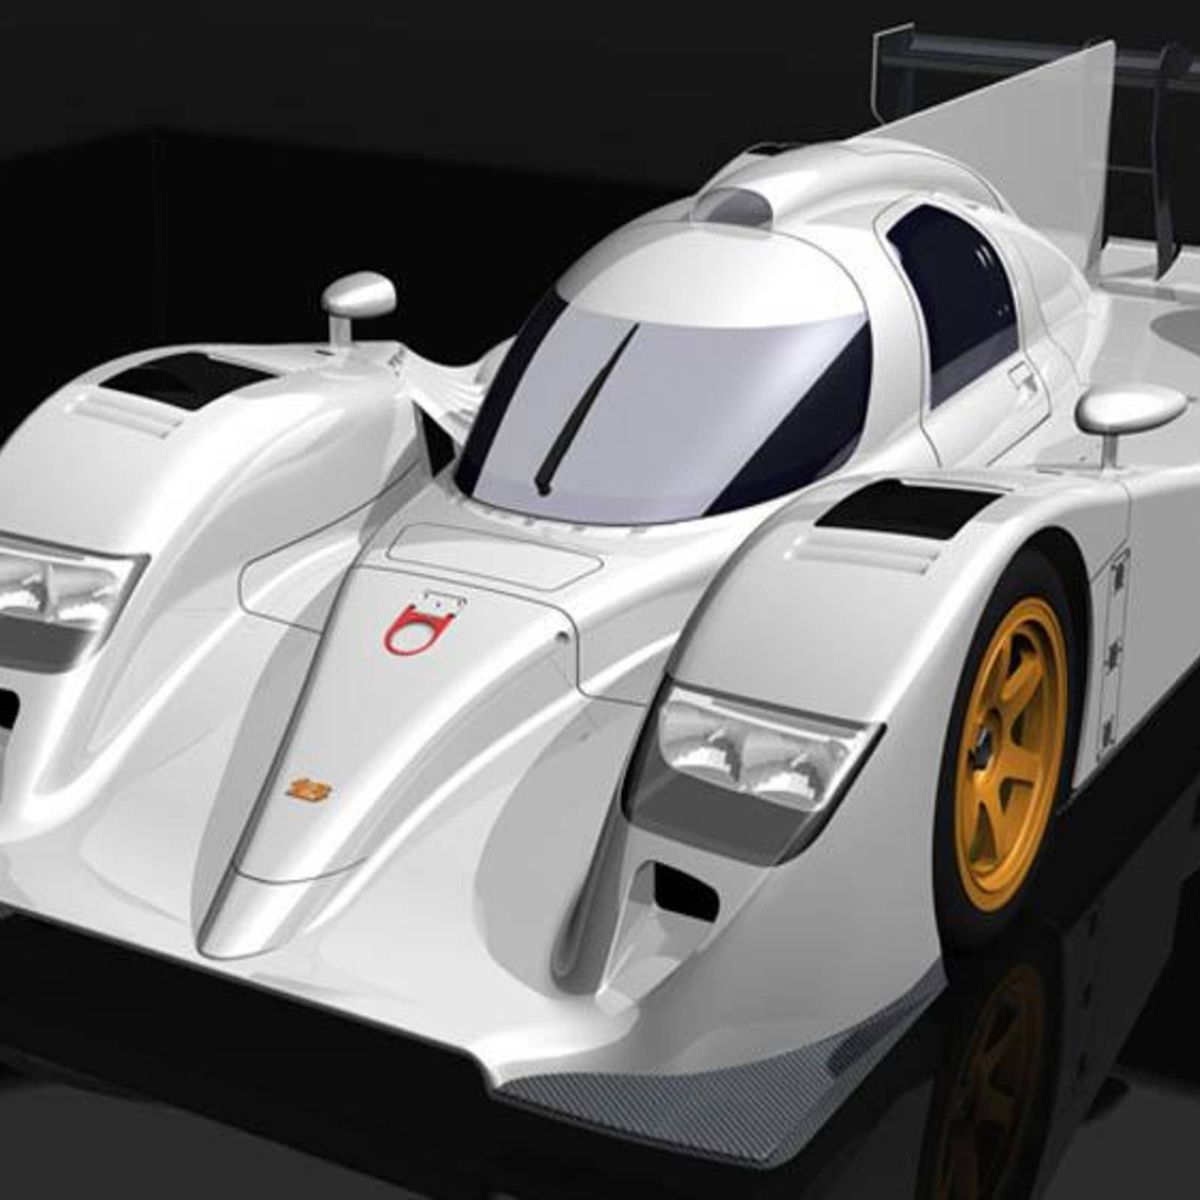 Spark S0057, Dome S101-Judd, No.19 Le Mans 2005  - Free Price Guide &  Review